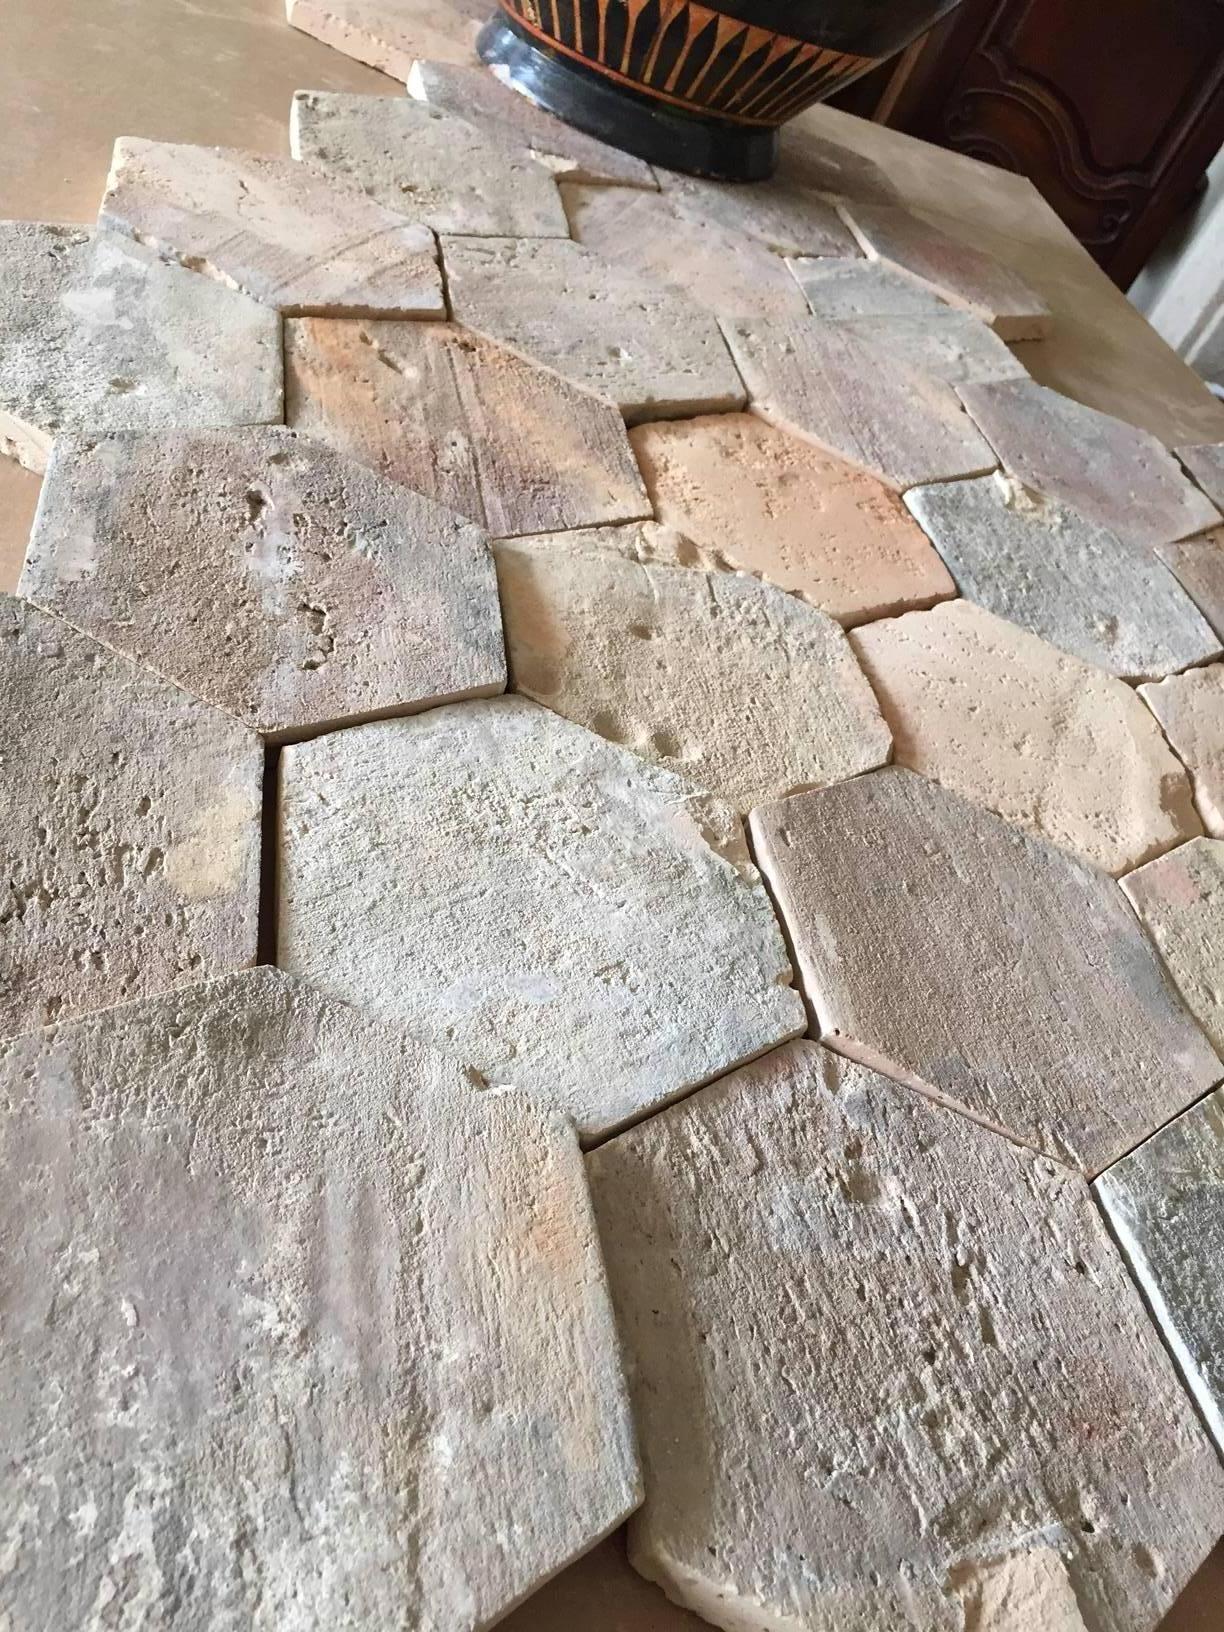 For a warm, rustic, Mediterranean look indoors or outdoors, look no further than our antique terracotta tiles. Crafted in France circa 1750, these classic tiles are each a hexagon shape. The ceramic flooring has a geometric pattern and a discrete